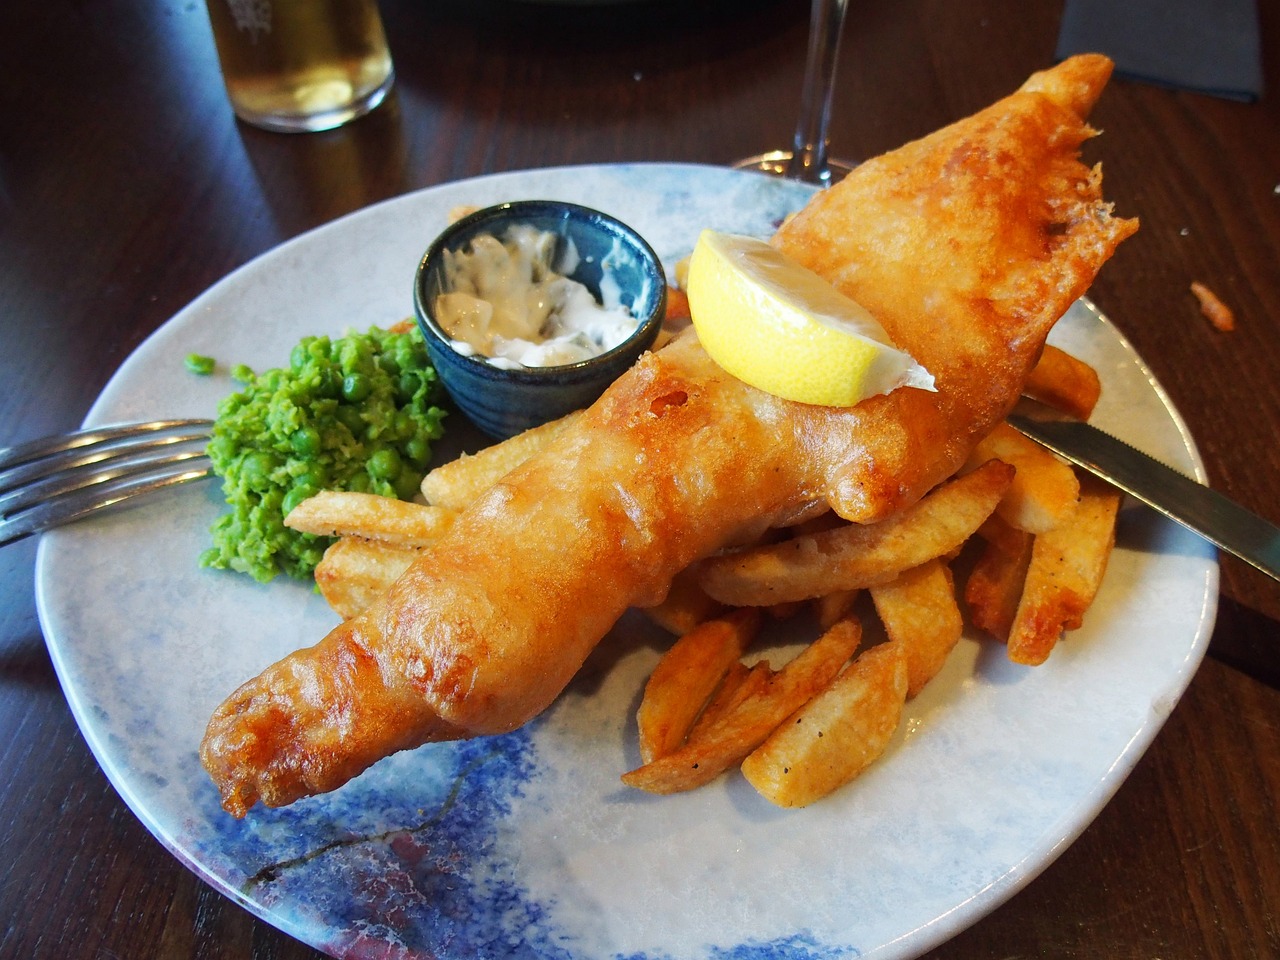 Fish and chips. Image by Ghislain from Pixabay